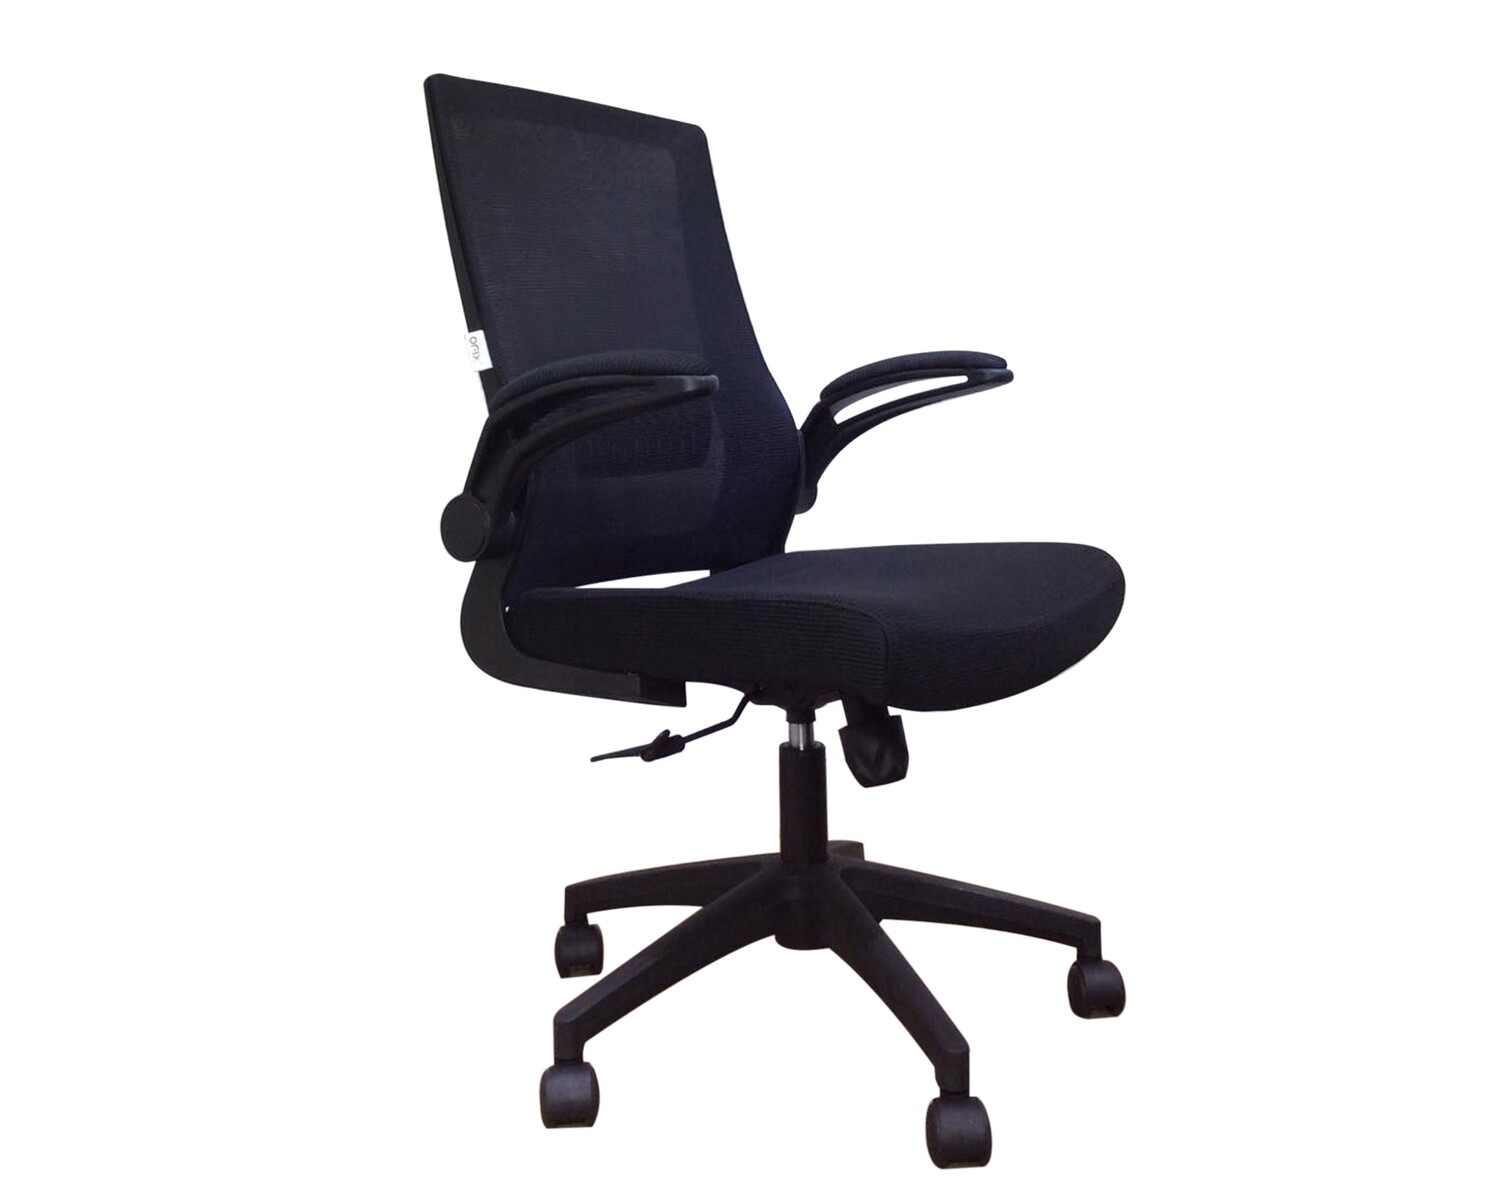 Ofix Deluxe-31/ 31H Mid/ High Back Mesh Office Chair (Black, Red, White, Blue, Grey)